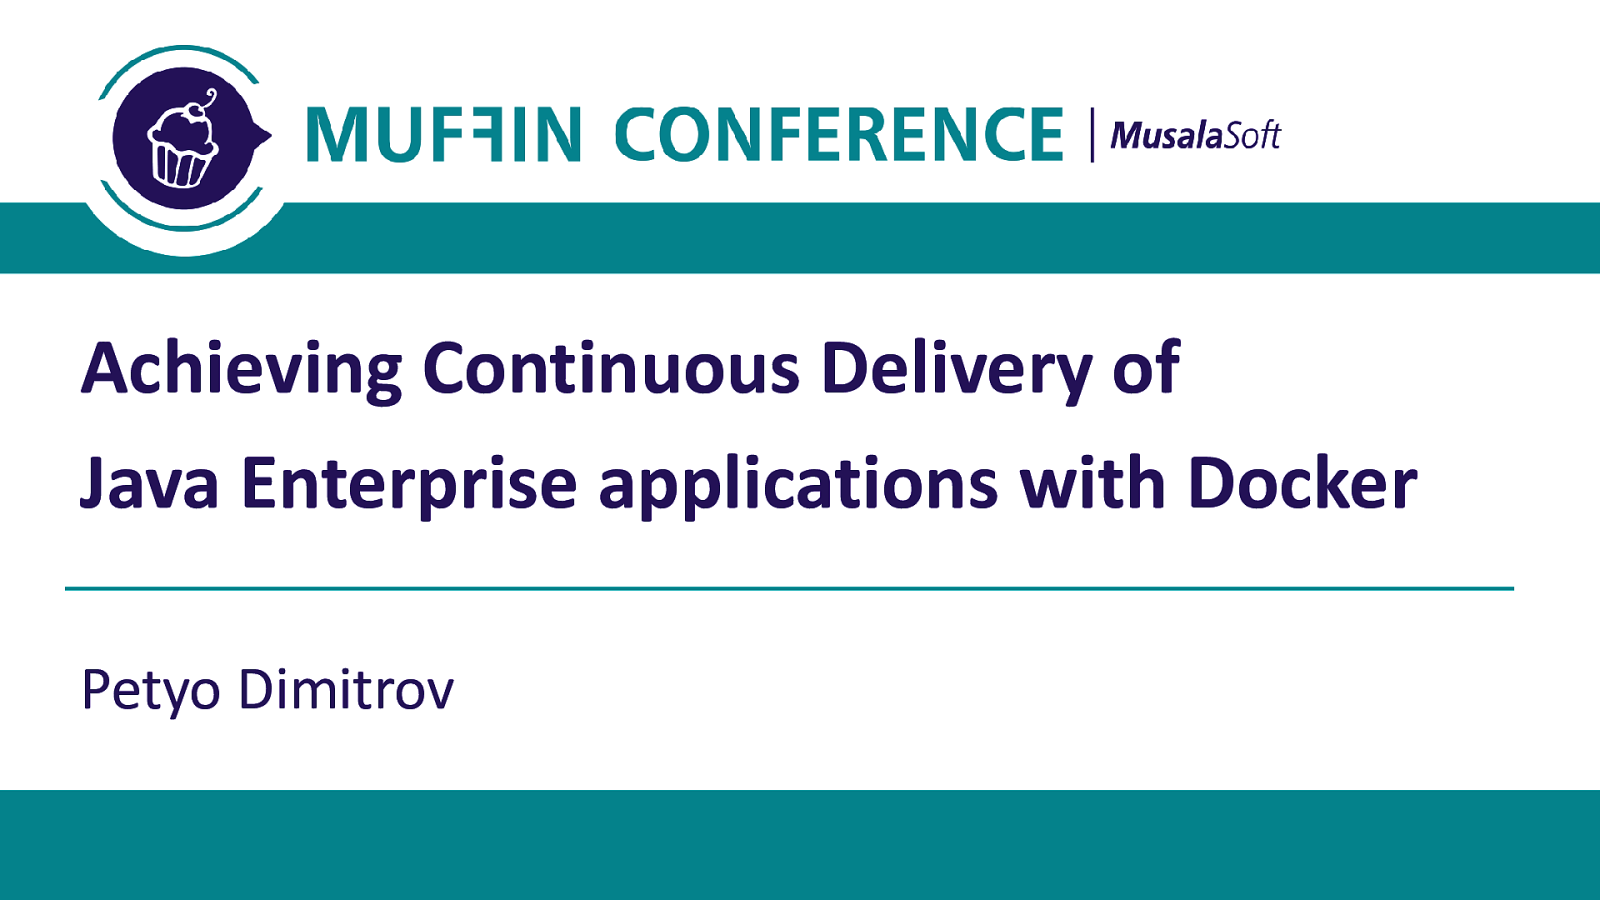 Achieving Continuous Delivery with Docker